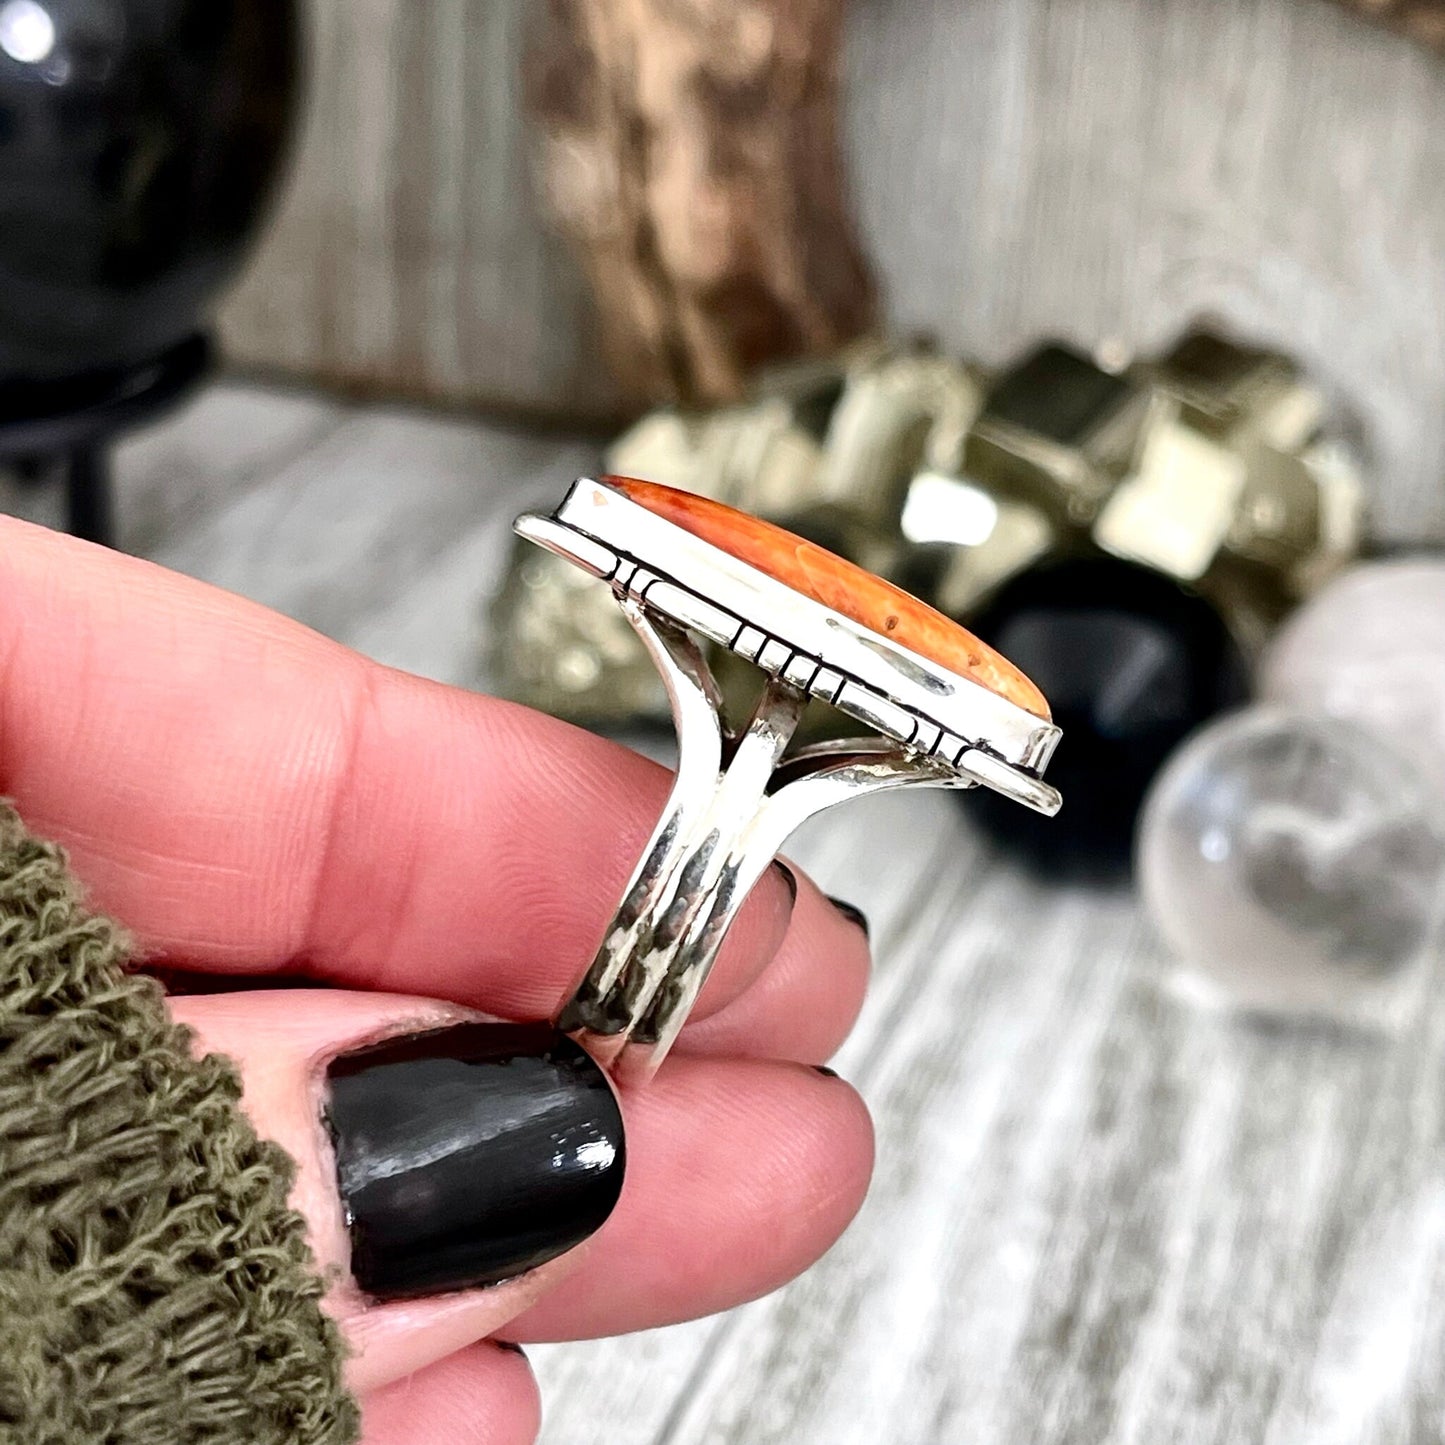 Size 9 Stunning Spiny Oyster Statement Ring Set in Sterling Silver / Curated by FOXLARK Collection